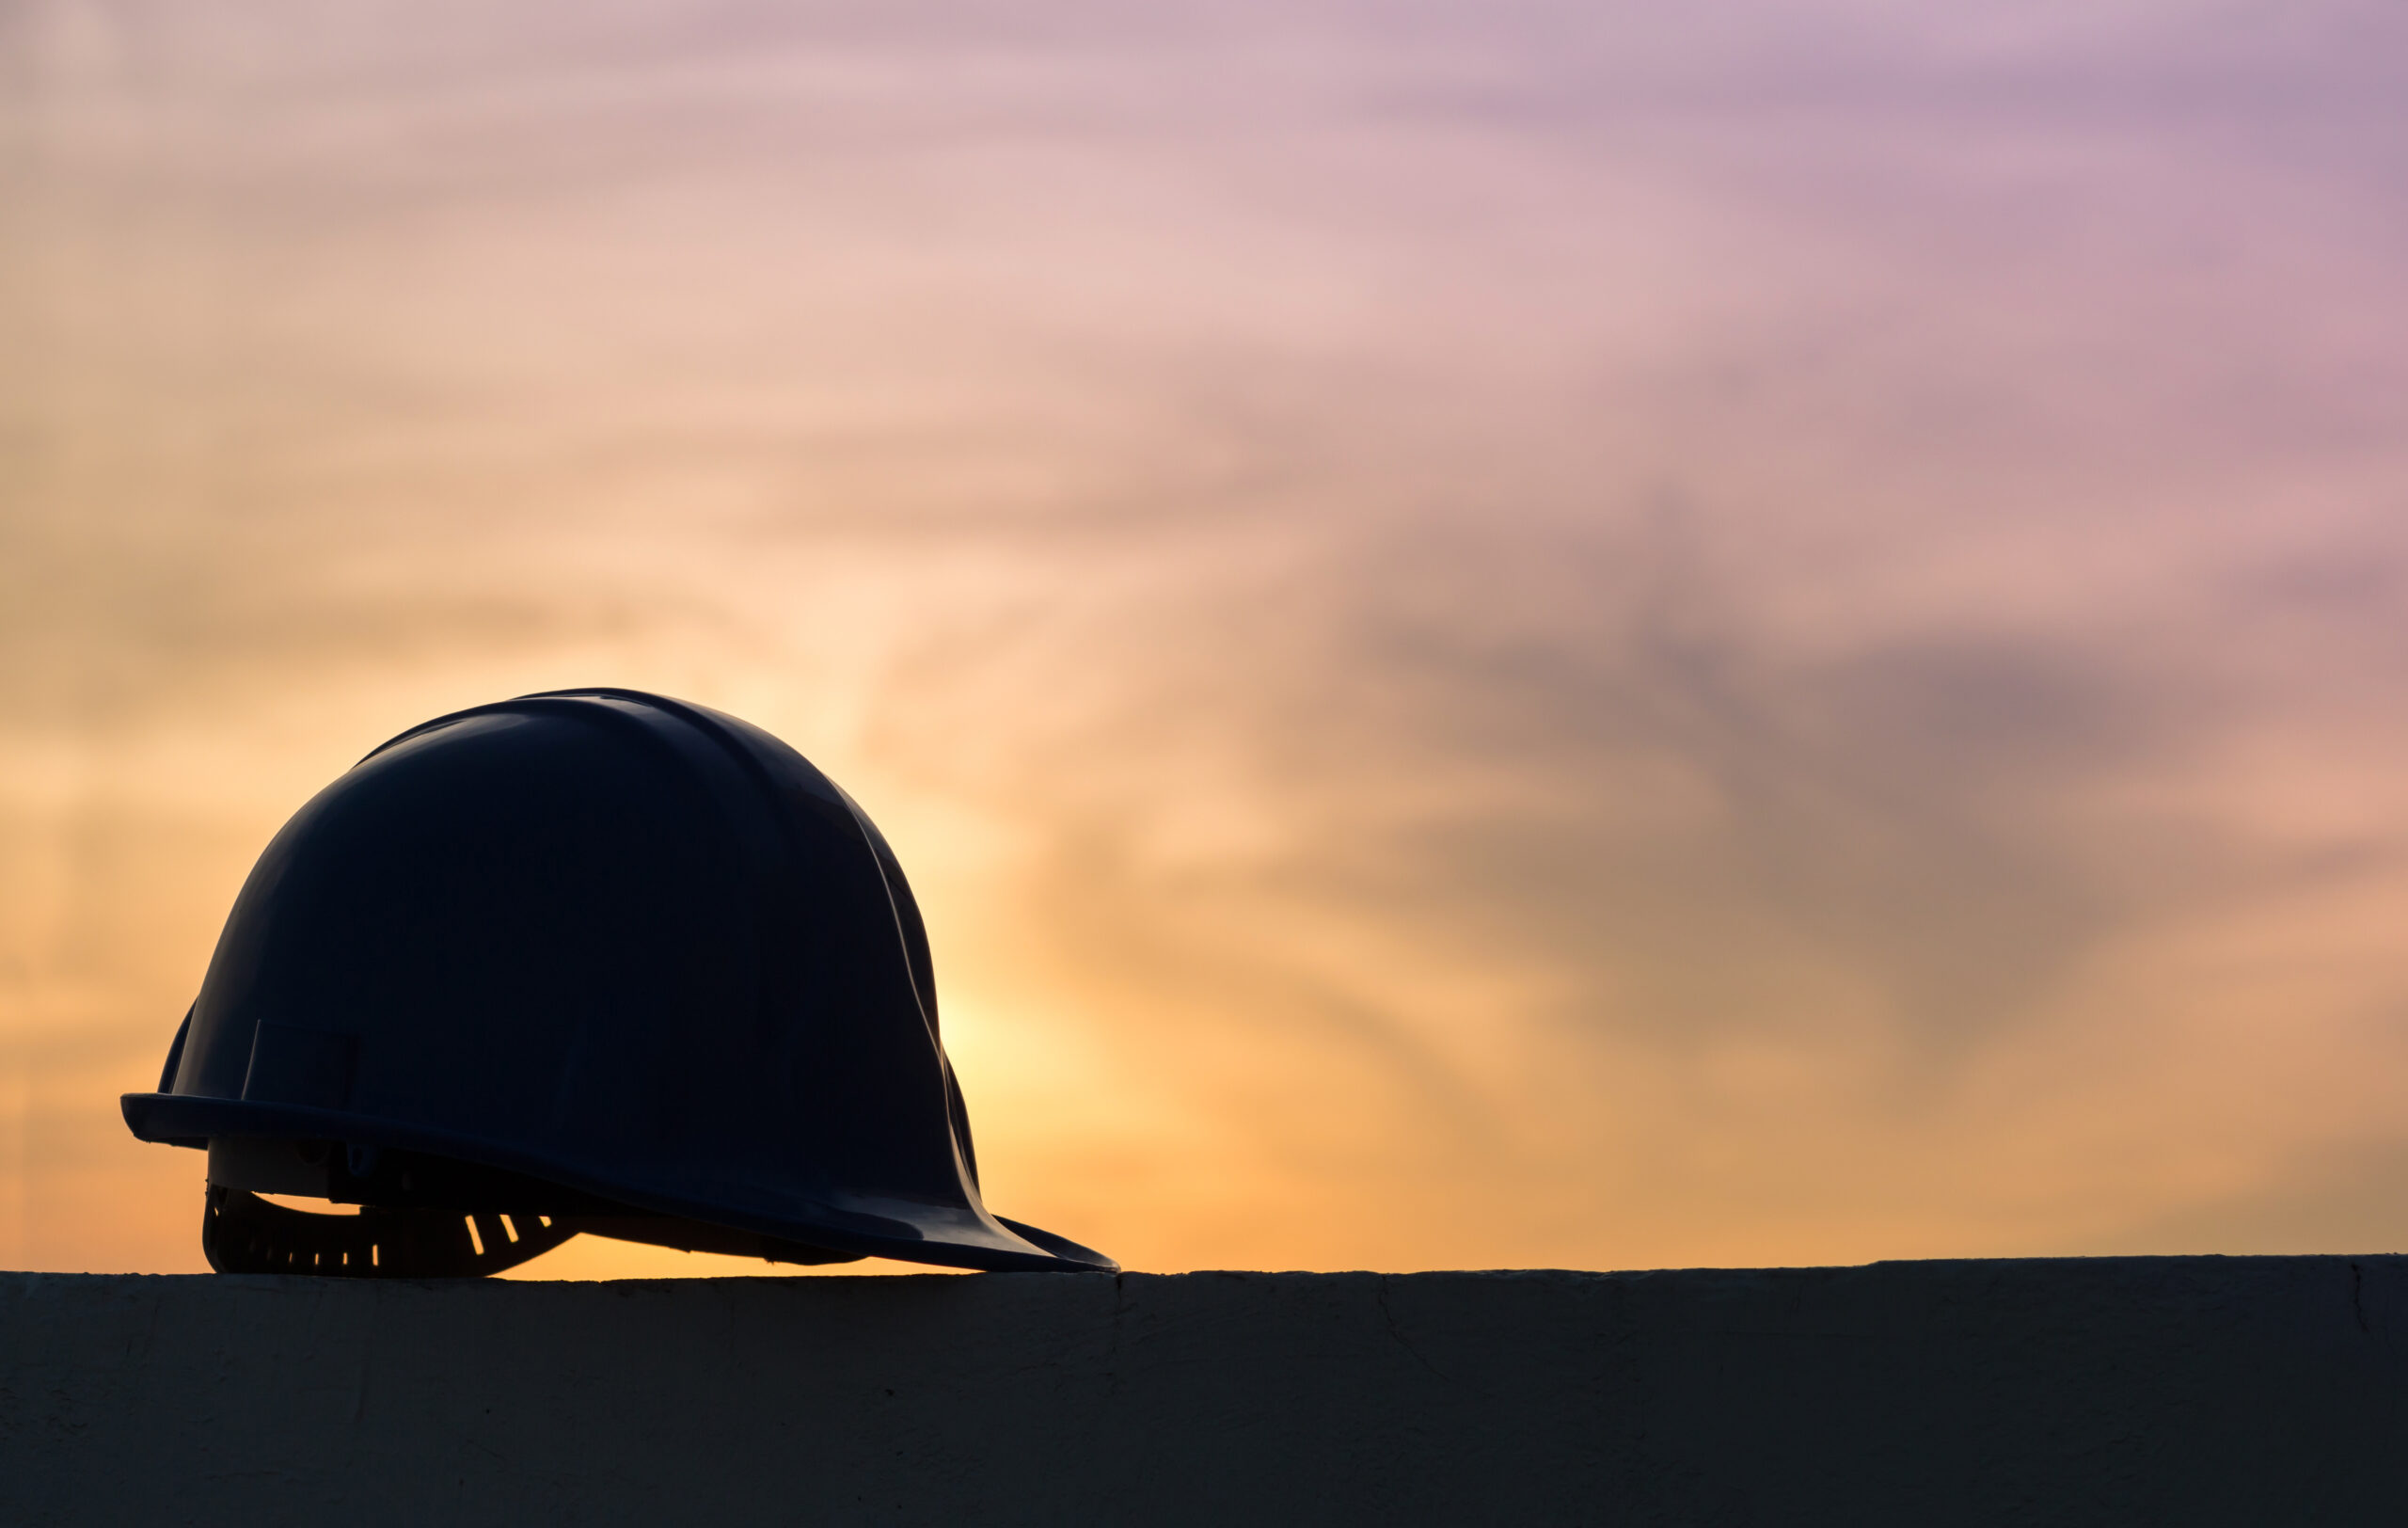 The safety helmet silhouette at construction site with sunset ba